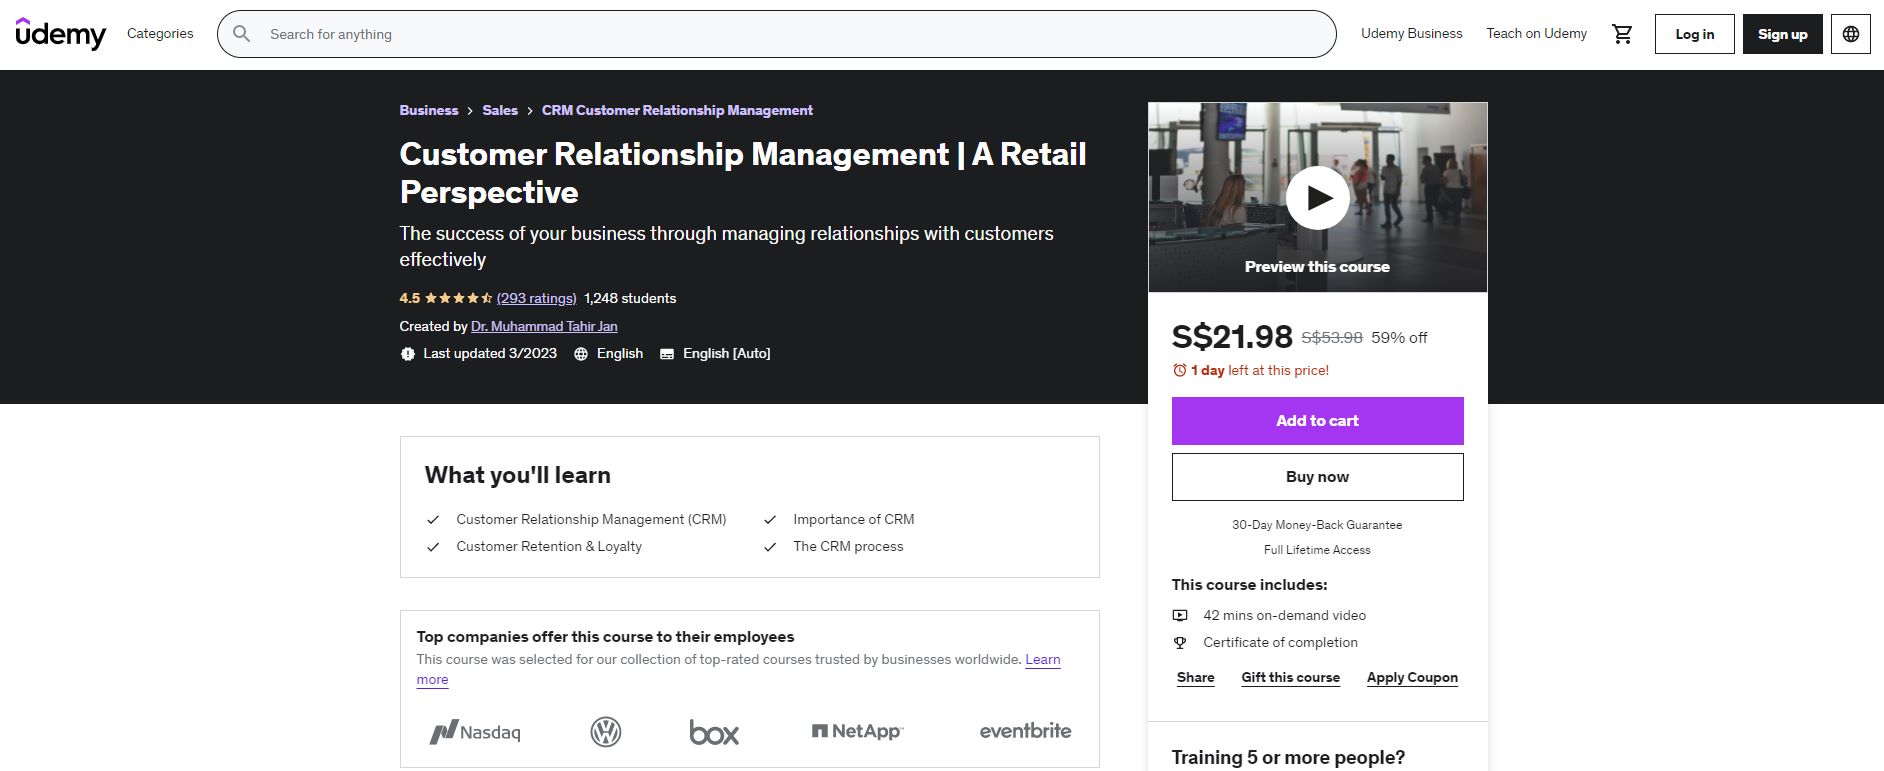 Retail training course Udemy: Retail Customer Relationship Management